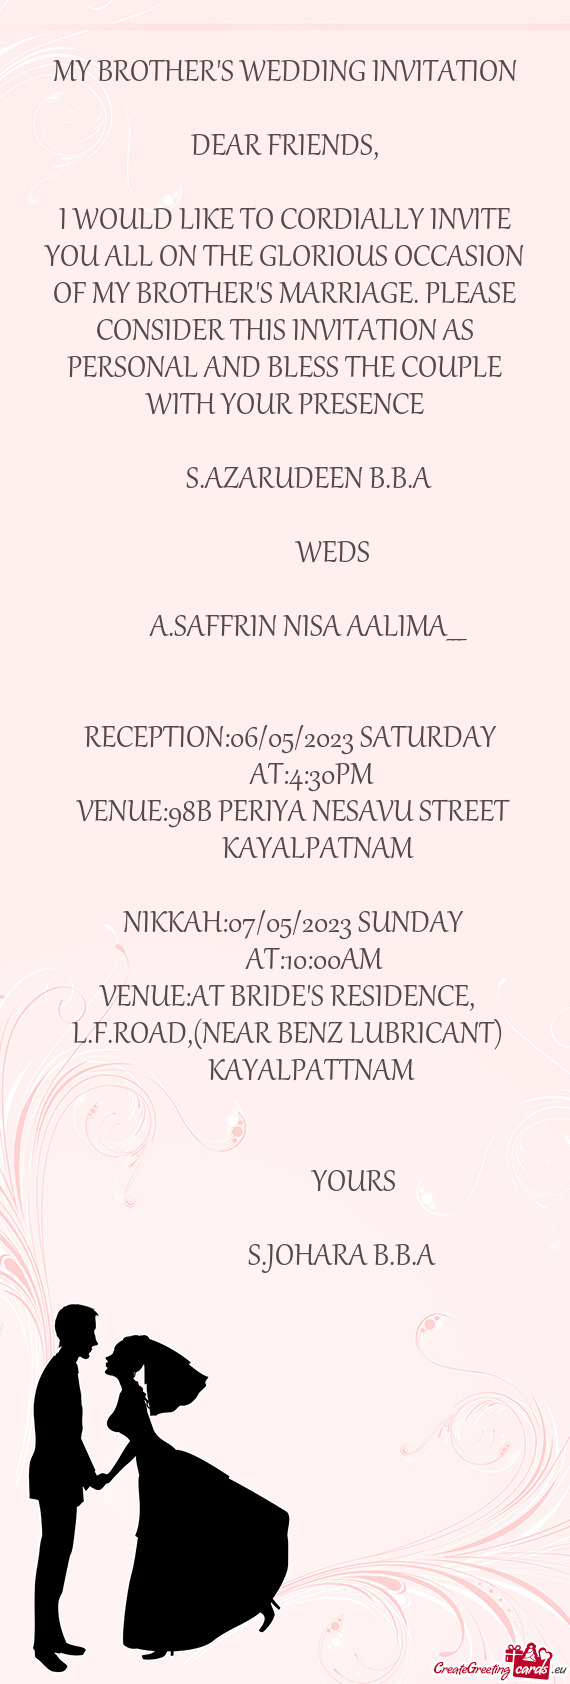 ONSIDER THIS INVITATION AS PERSONAL AND BLESS THE COUPLE WITH YOUR PRESENCE